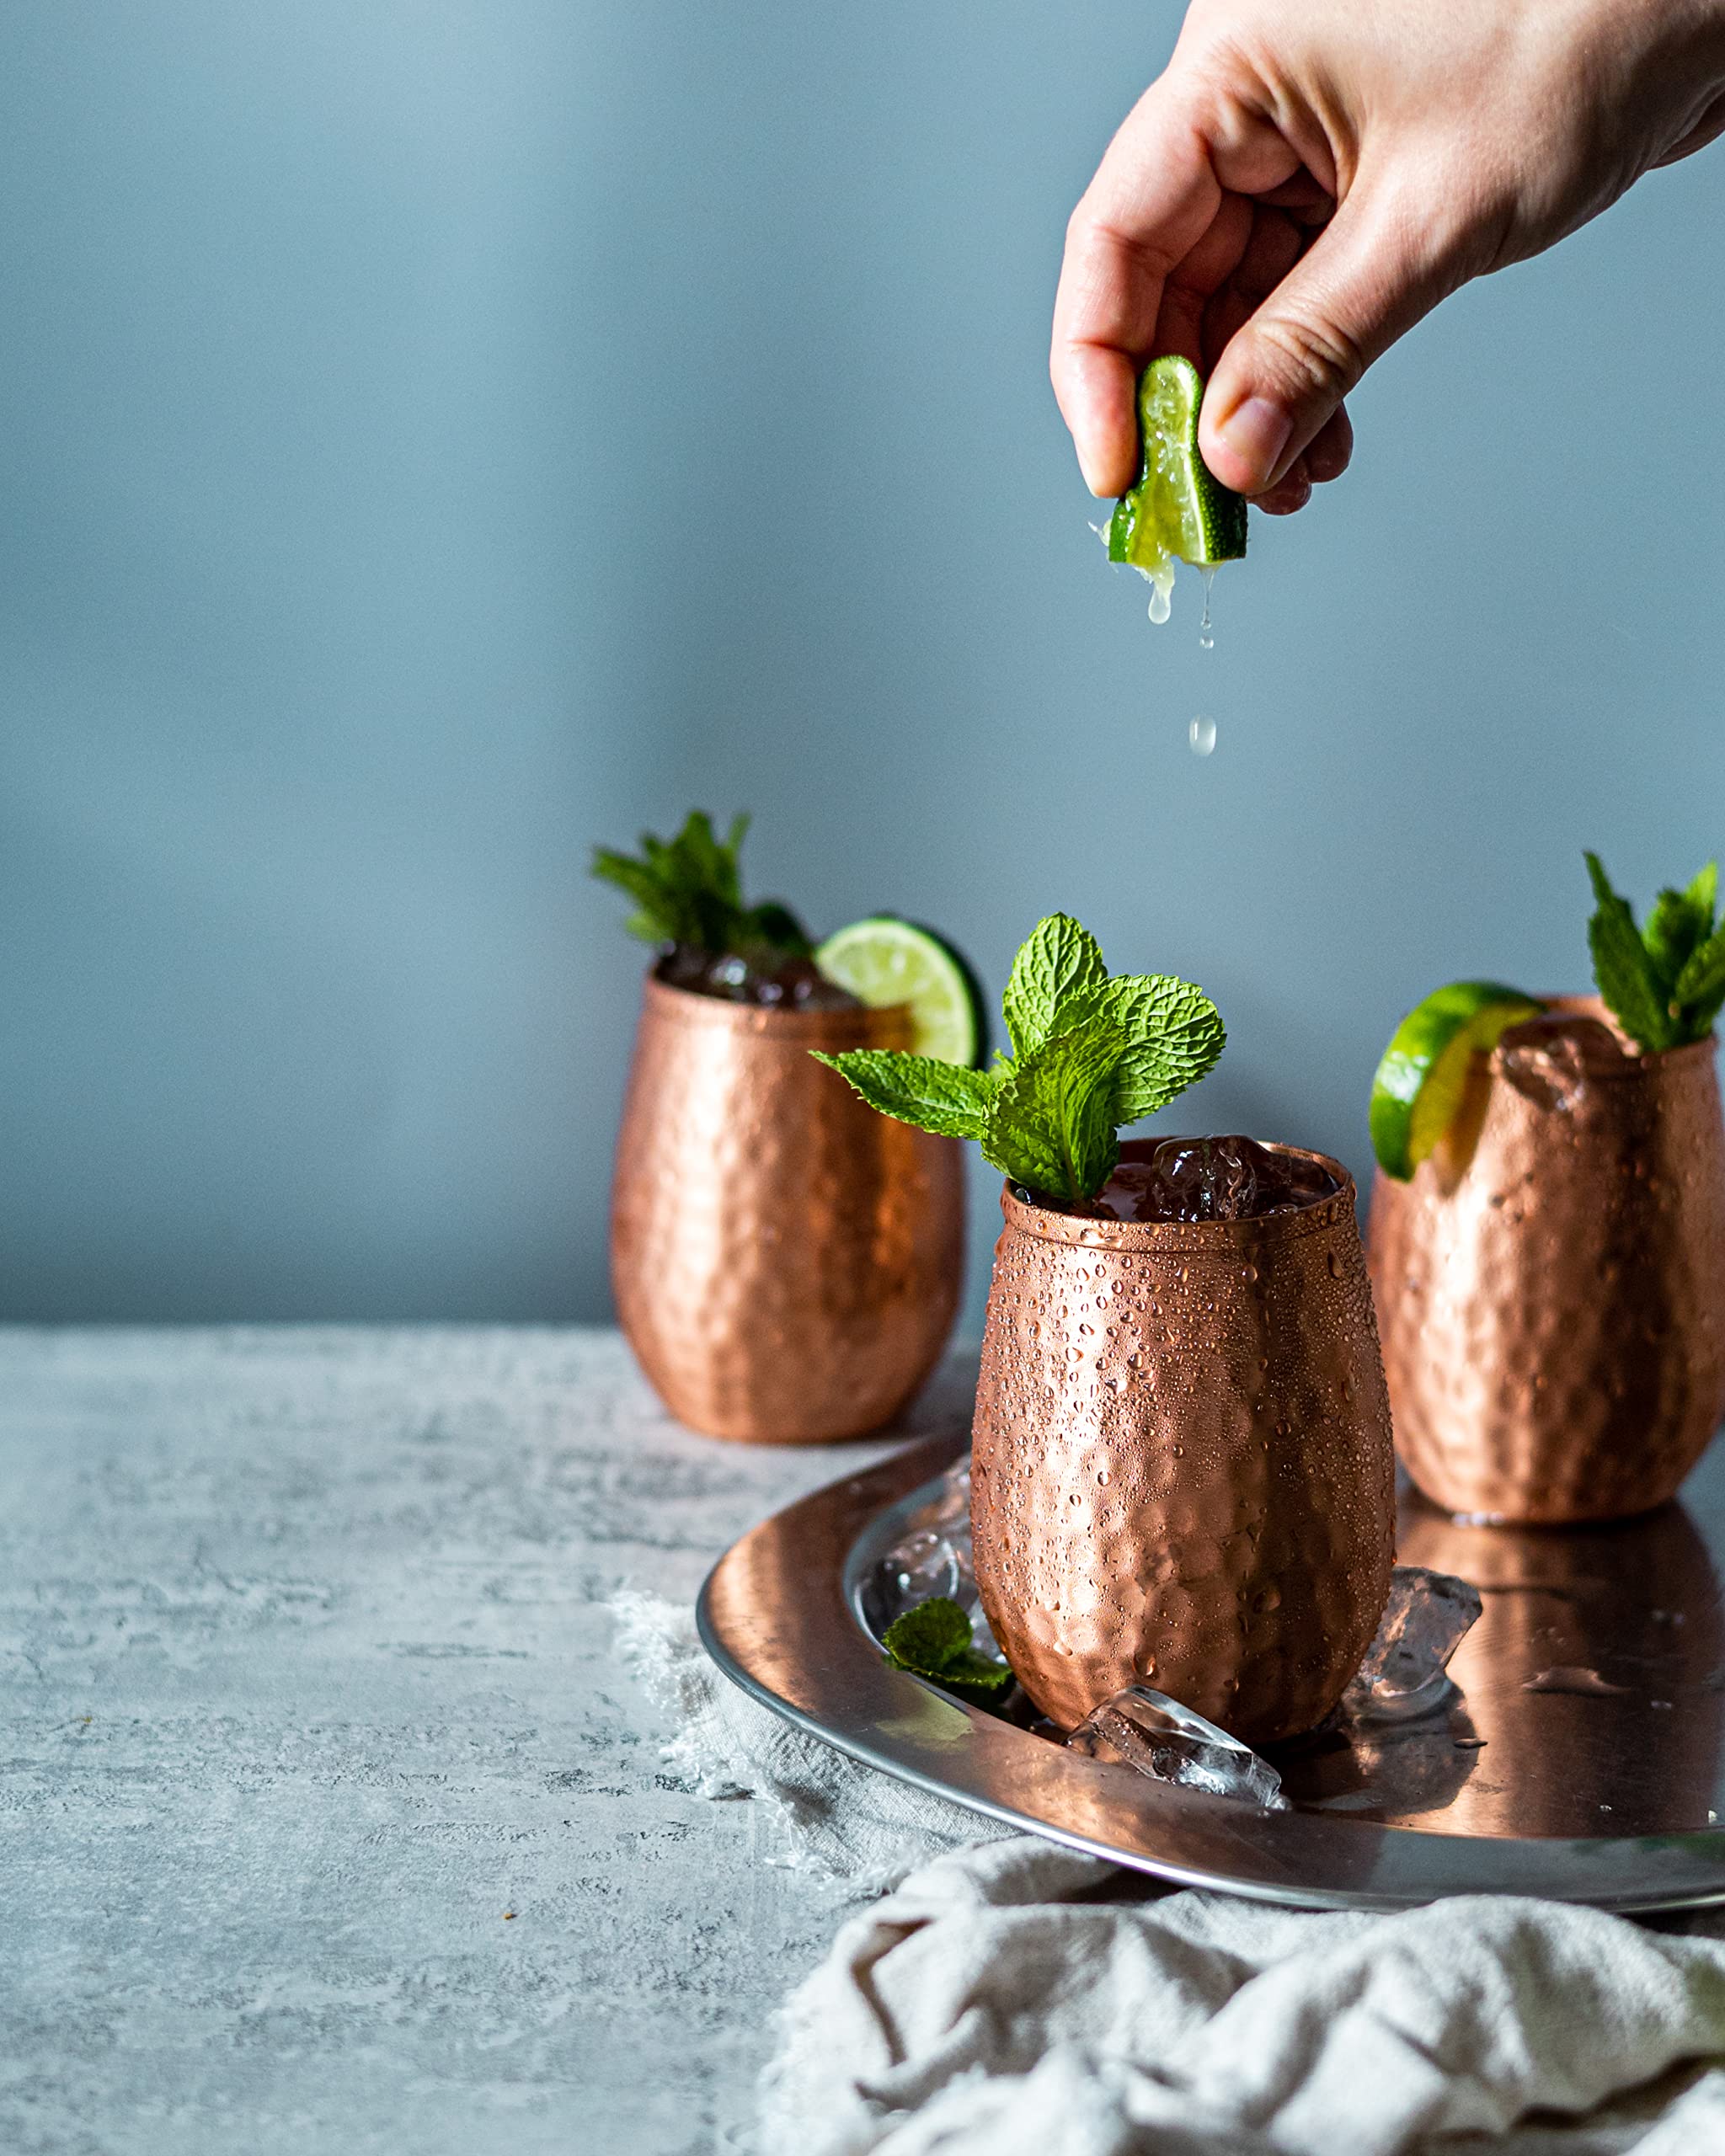 Kosdeg Copper Cups - 12 Oz set of 4 - A Unique Way To Enjoy Wine - The Perfect Pure Copper Tumbler for Water - Copper Drinking Cups Better Than Glasses or Plastic - Moscow Mule Copper Cup For Drinking